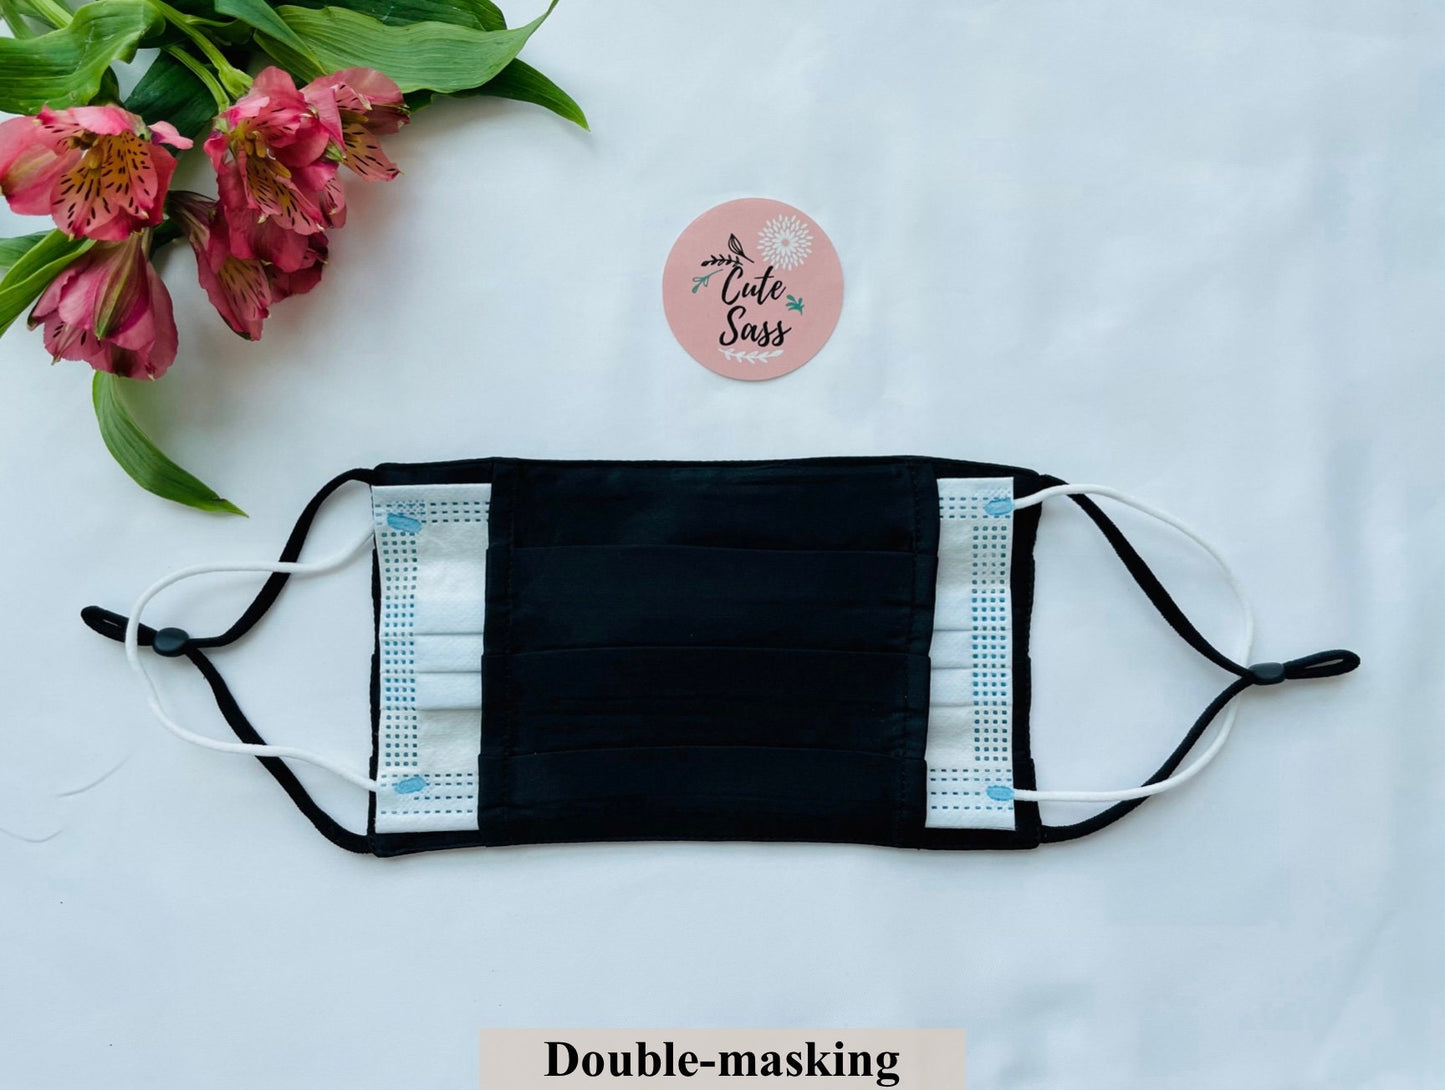 NEW & IMPROVED Pleated Mulberry Silk Face Mask with Nose Wire,Filter Pocket, and Adjustable Earloops |Three layers|Real 22MM Long Fibre Silk